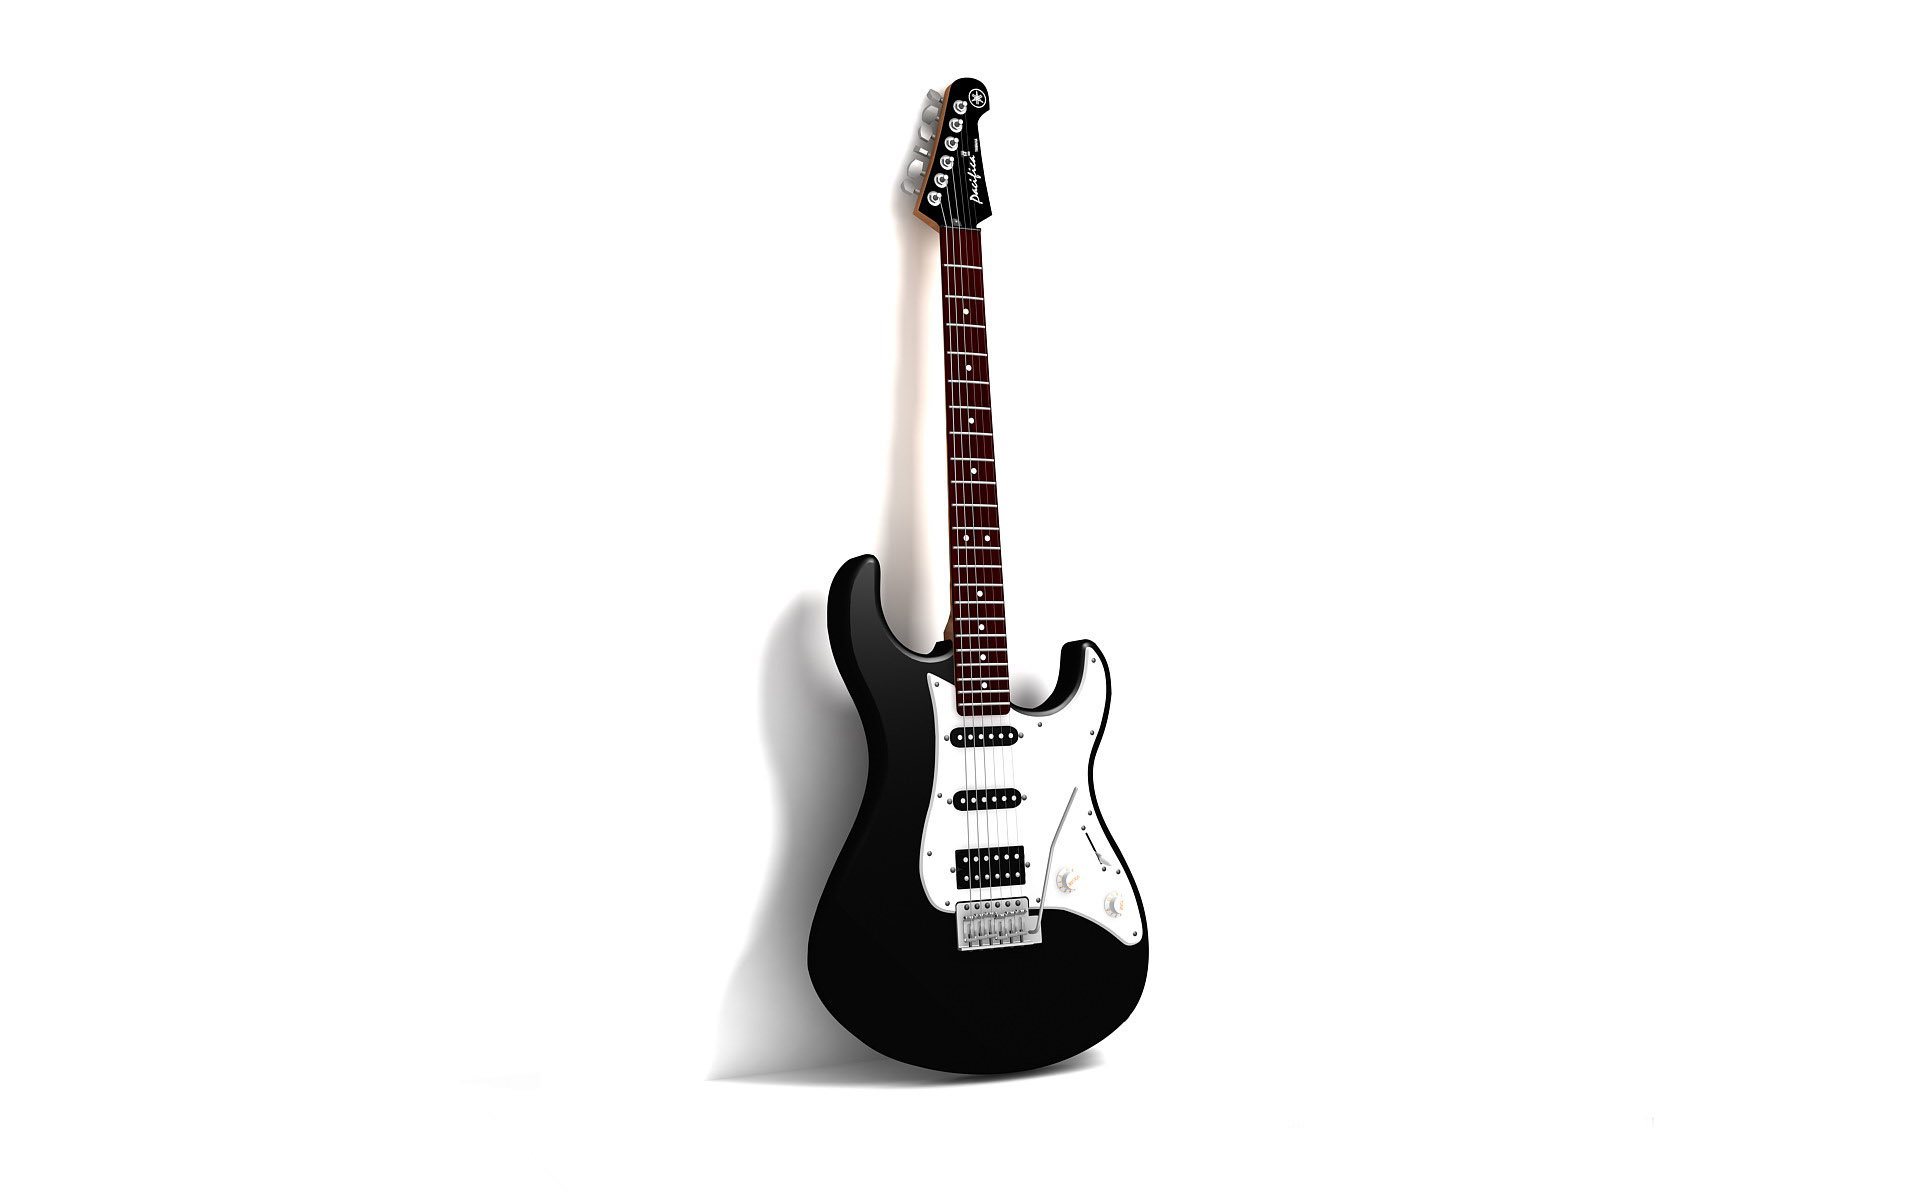 Black And White Pictures Of Guitars - White Background Wallpaper Hd - HD Wallpaper 